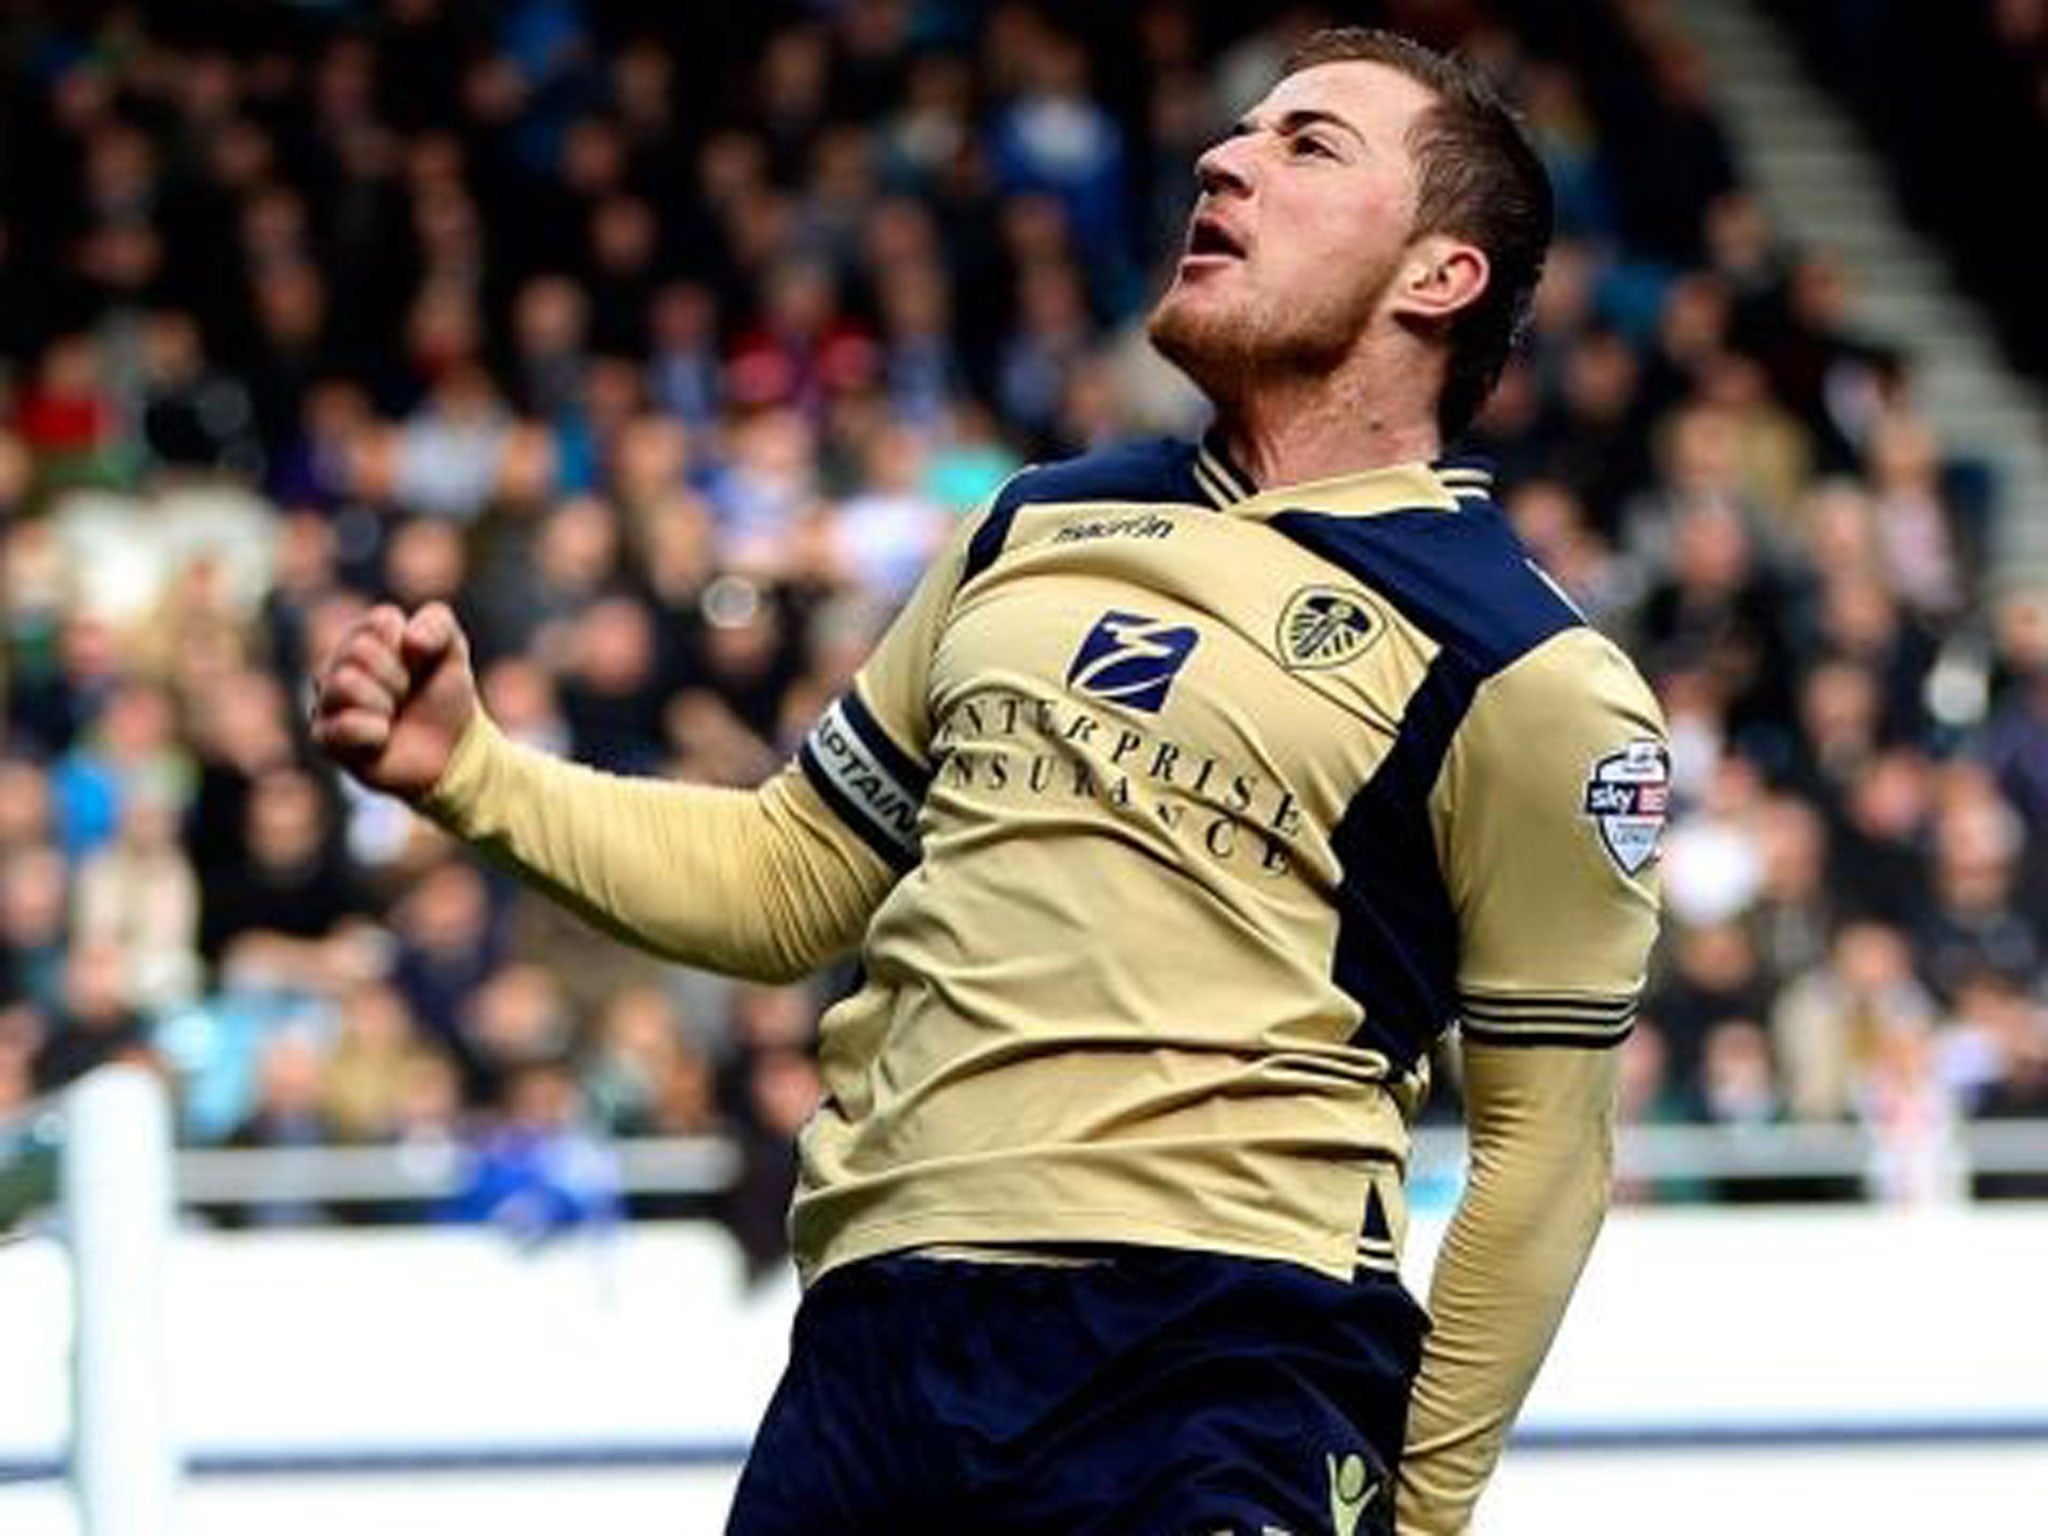 Yorkshire grit: Ross McCormack sees his penalty saved before celebrating his opener